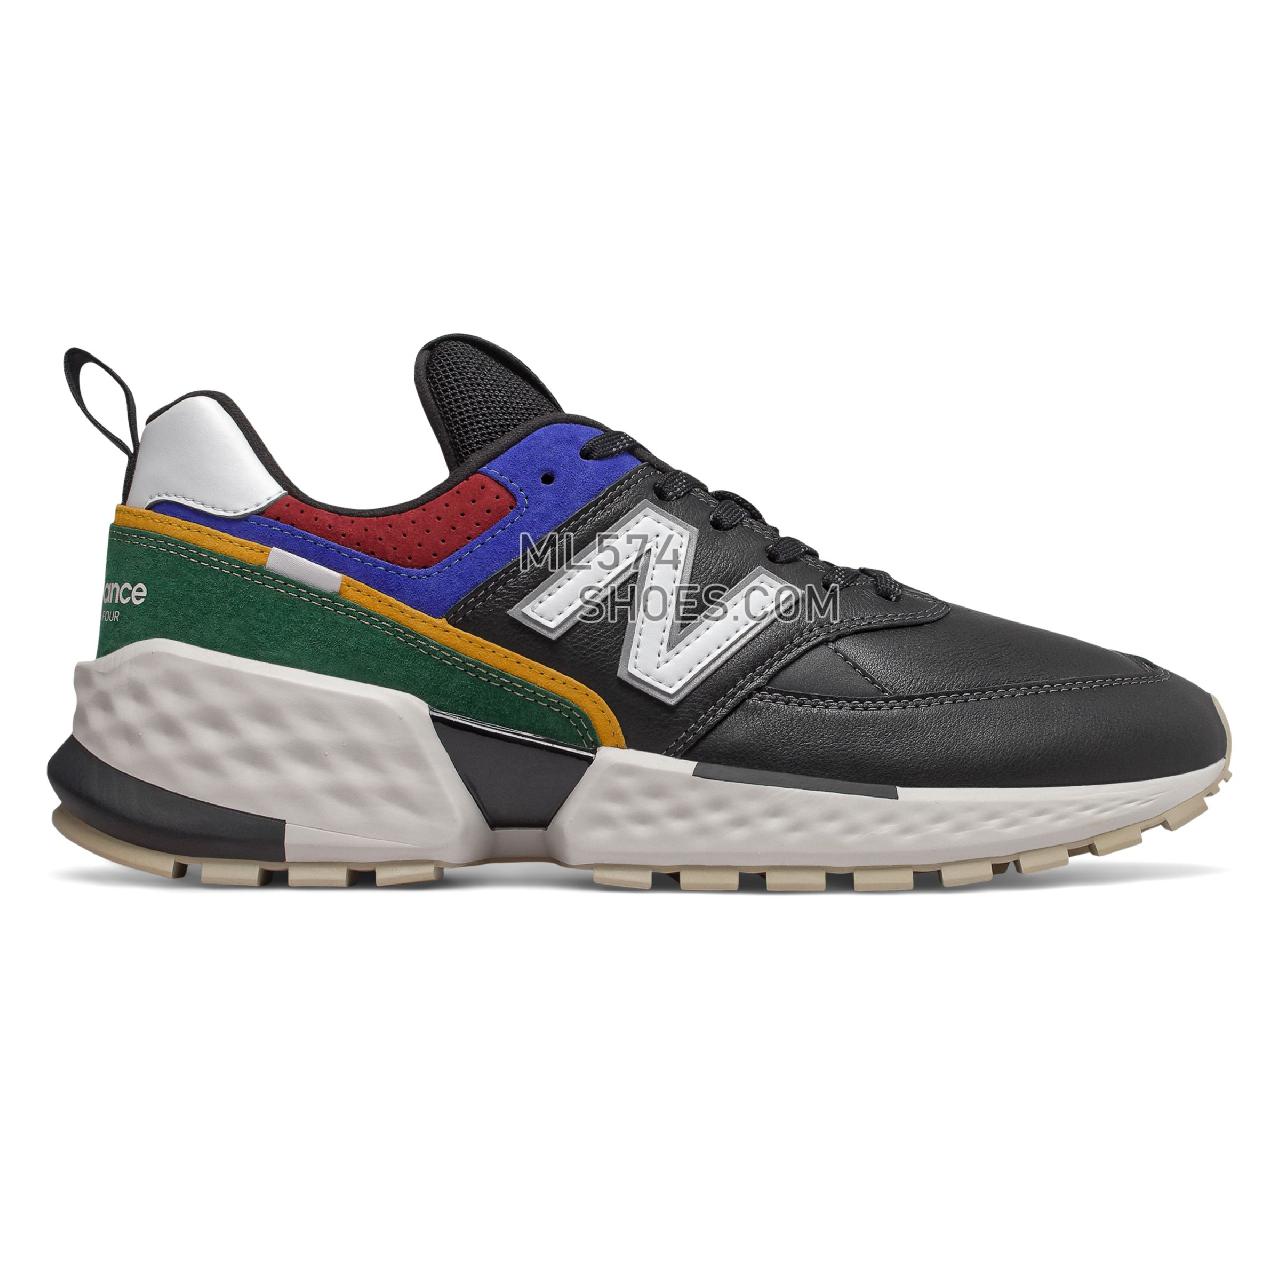 New Balance 574 Sport - Men's Sport Style Sneakers - Black with Team Forest Green - MS574APB